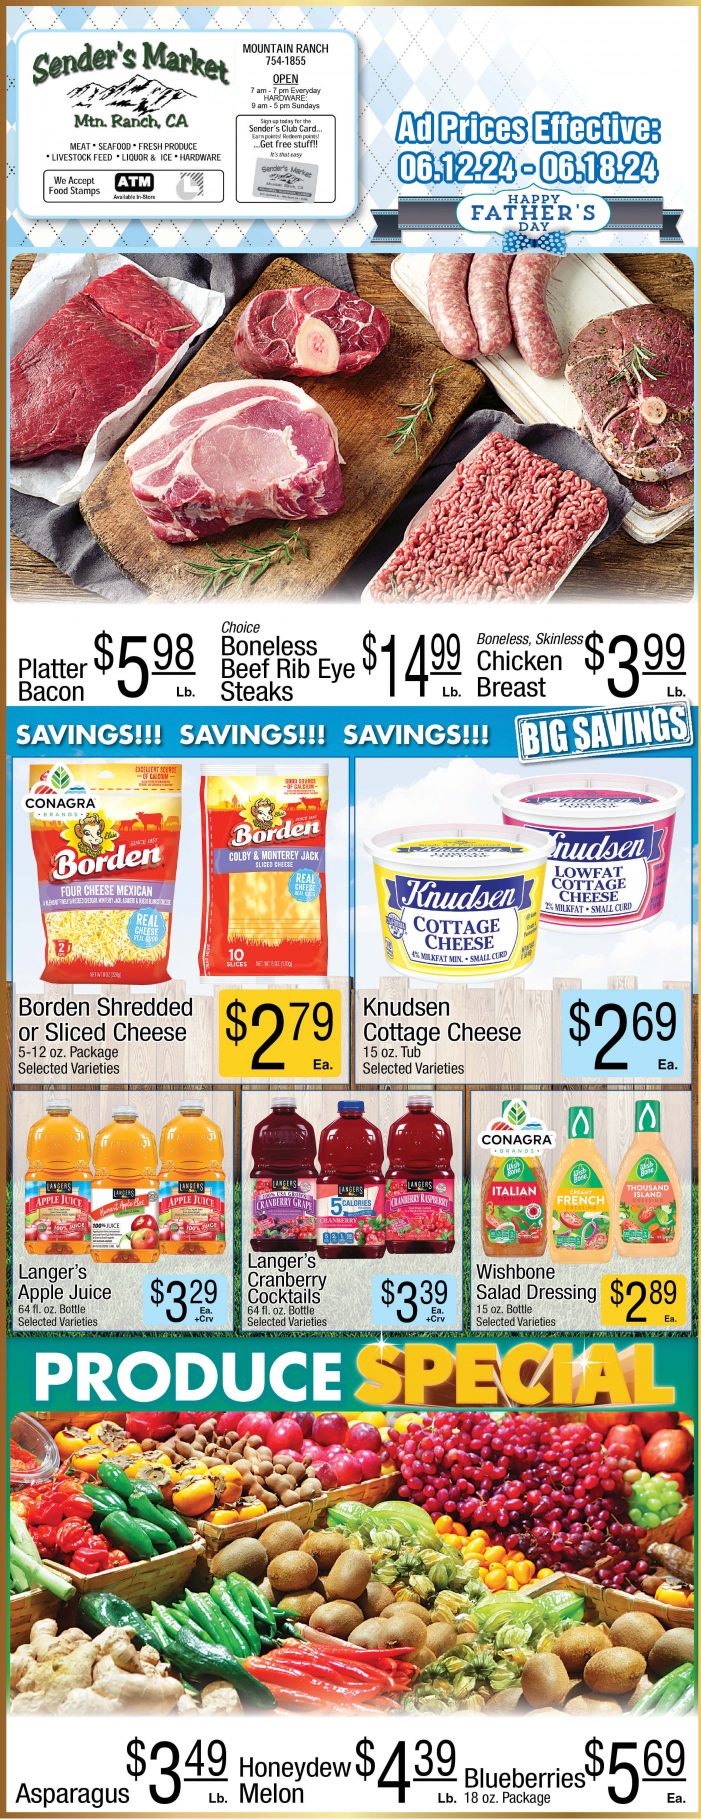 Sender’s Market Weekly Ad & Grocery Specials Through June 18th! Shop Local & Save!!